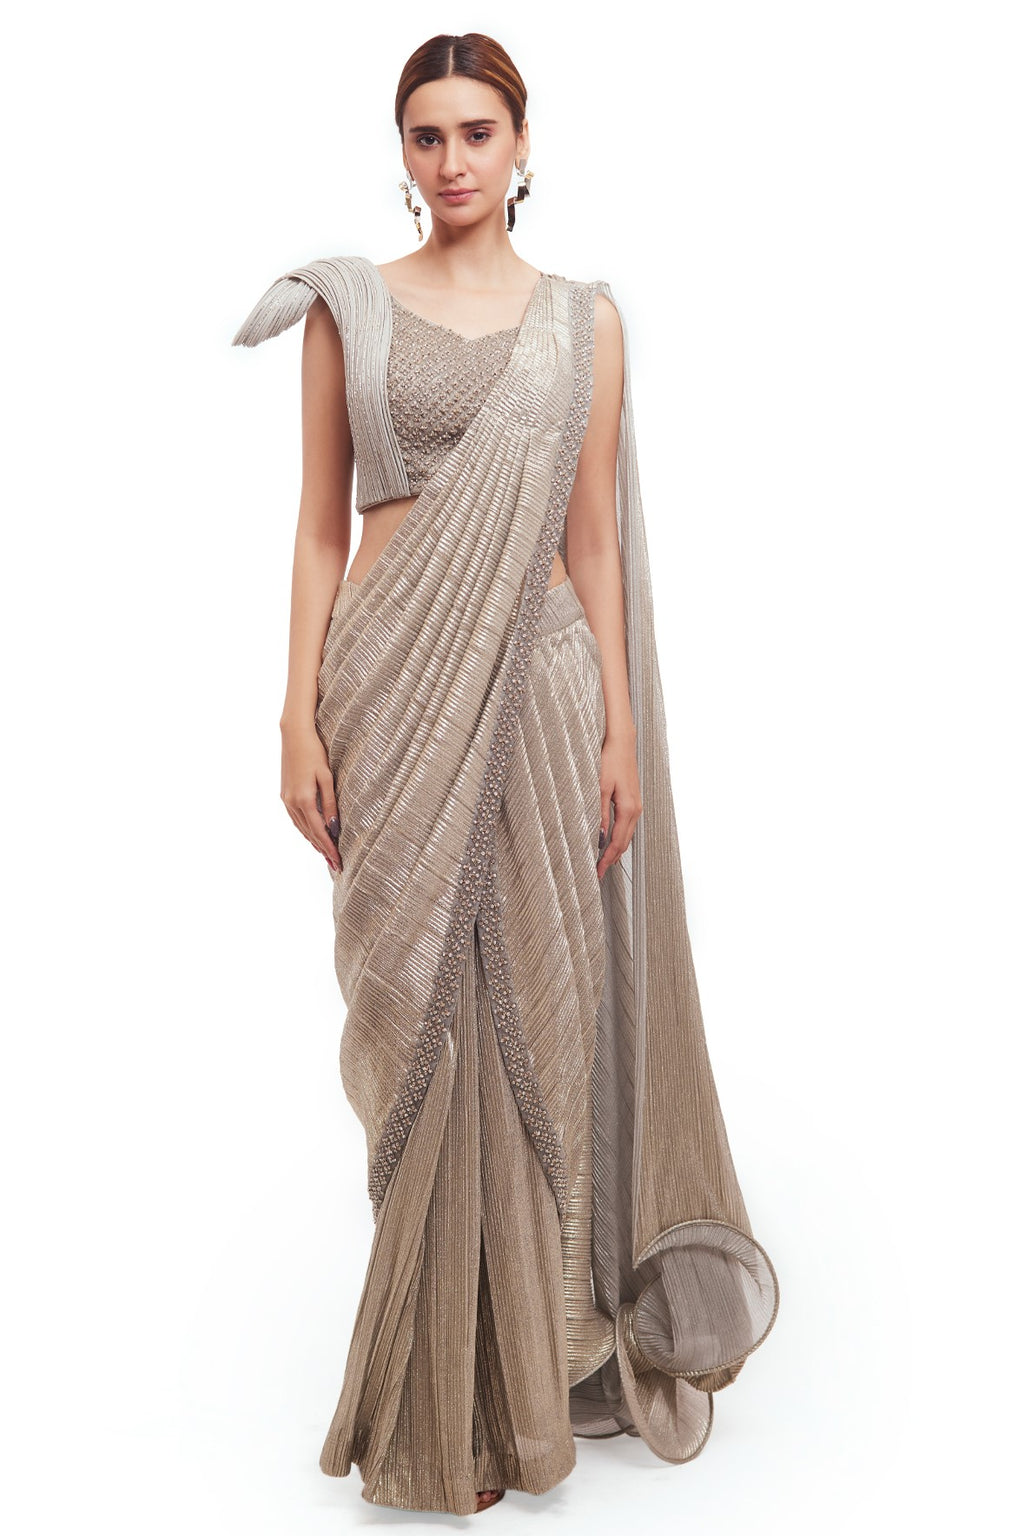 Buy grey crushed fabric draped saree online in USA with structured blouse. Look your best at parties and weddings in beautiful designer sarees, embroidered sarees, handwoven sarees, silk sarees, organza saris from Pure Elegance Indian saree store in USA.-full view